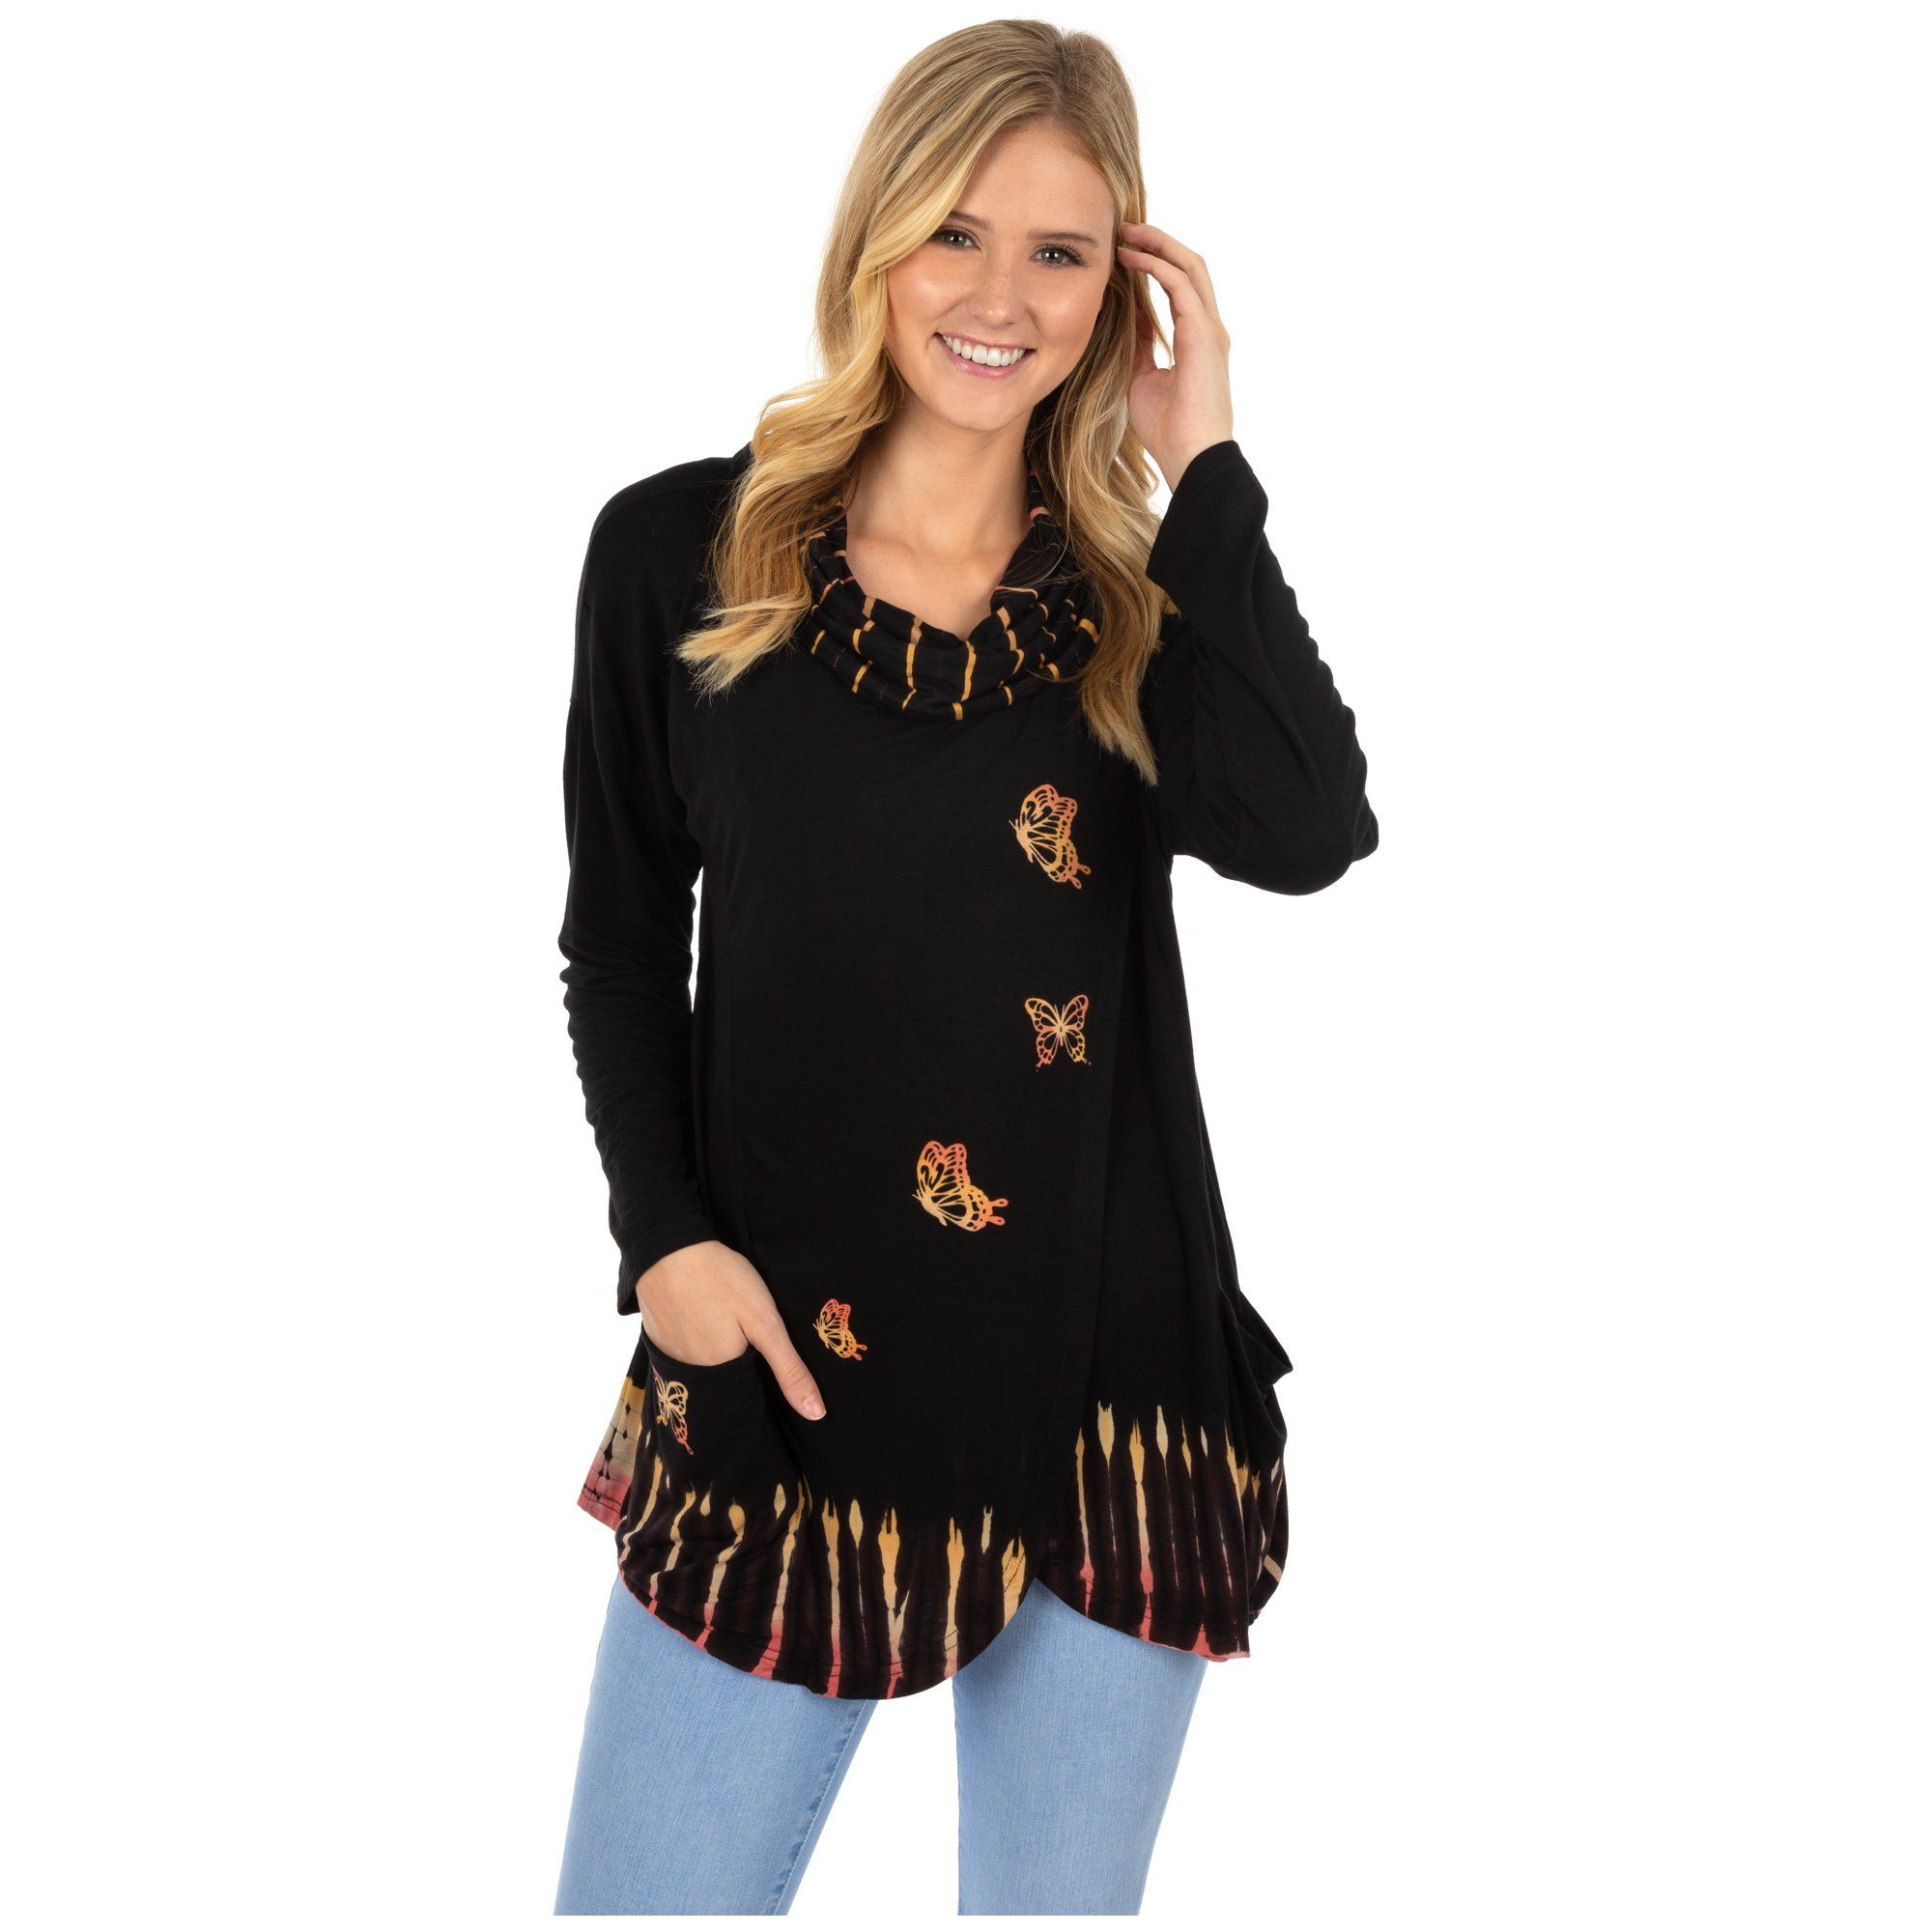 Butterfly Dawn Crossover Tunic - 4X